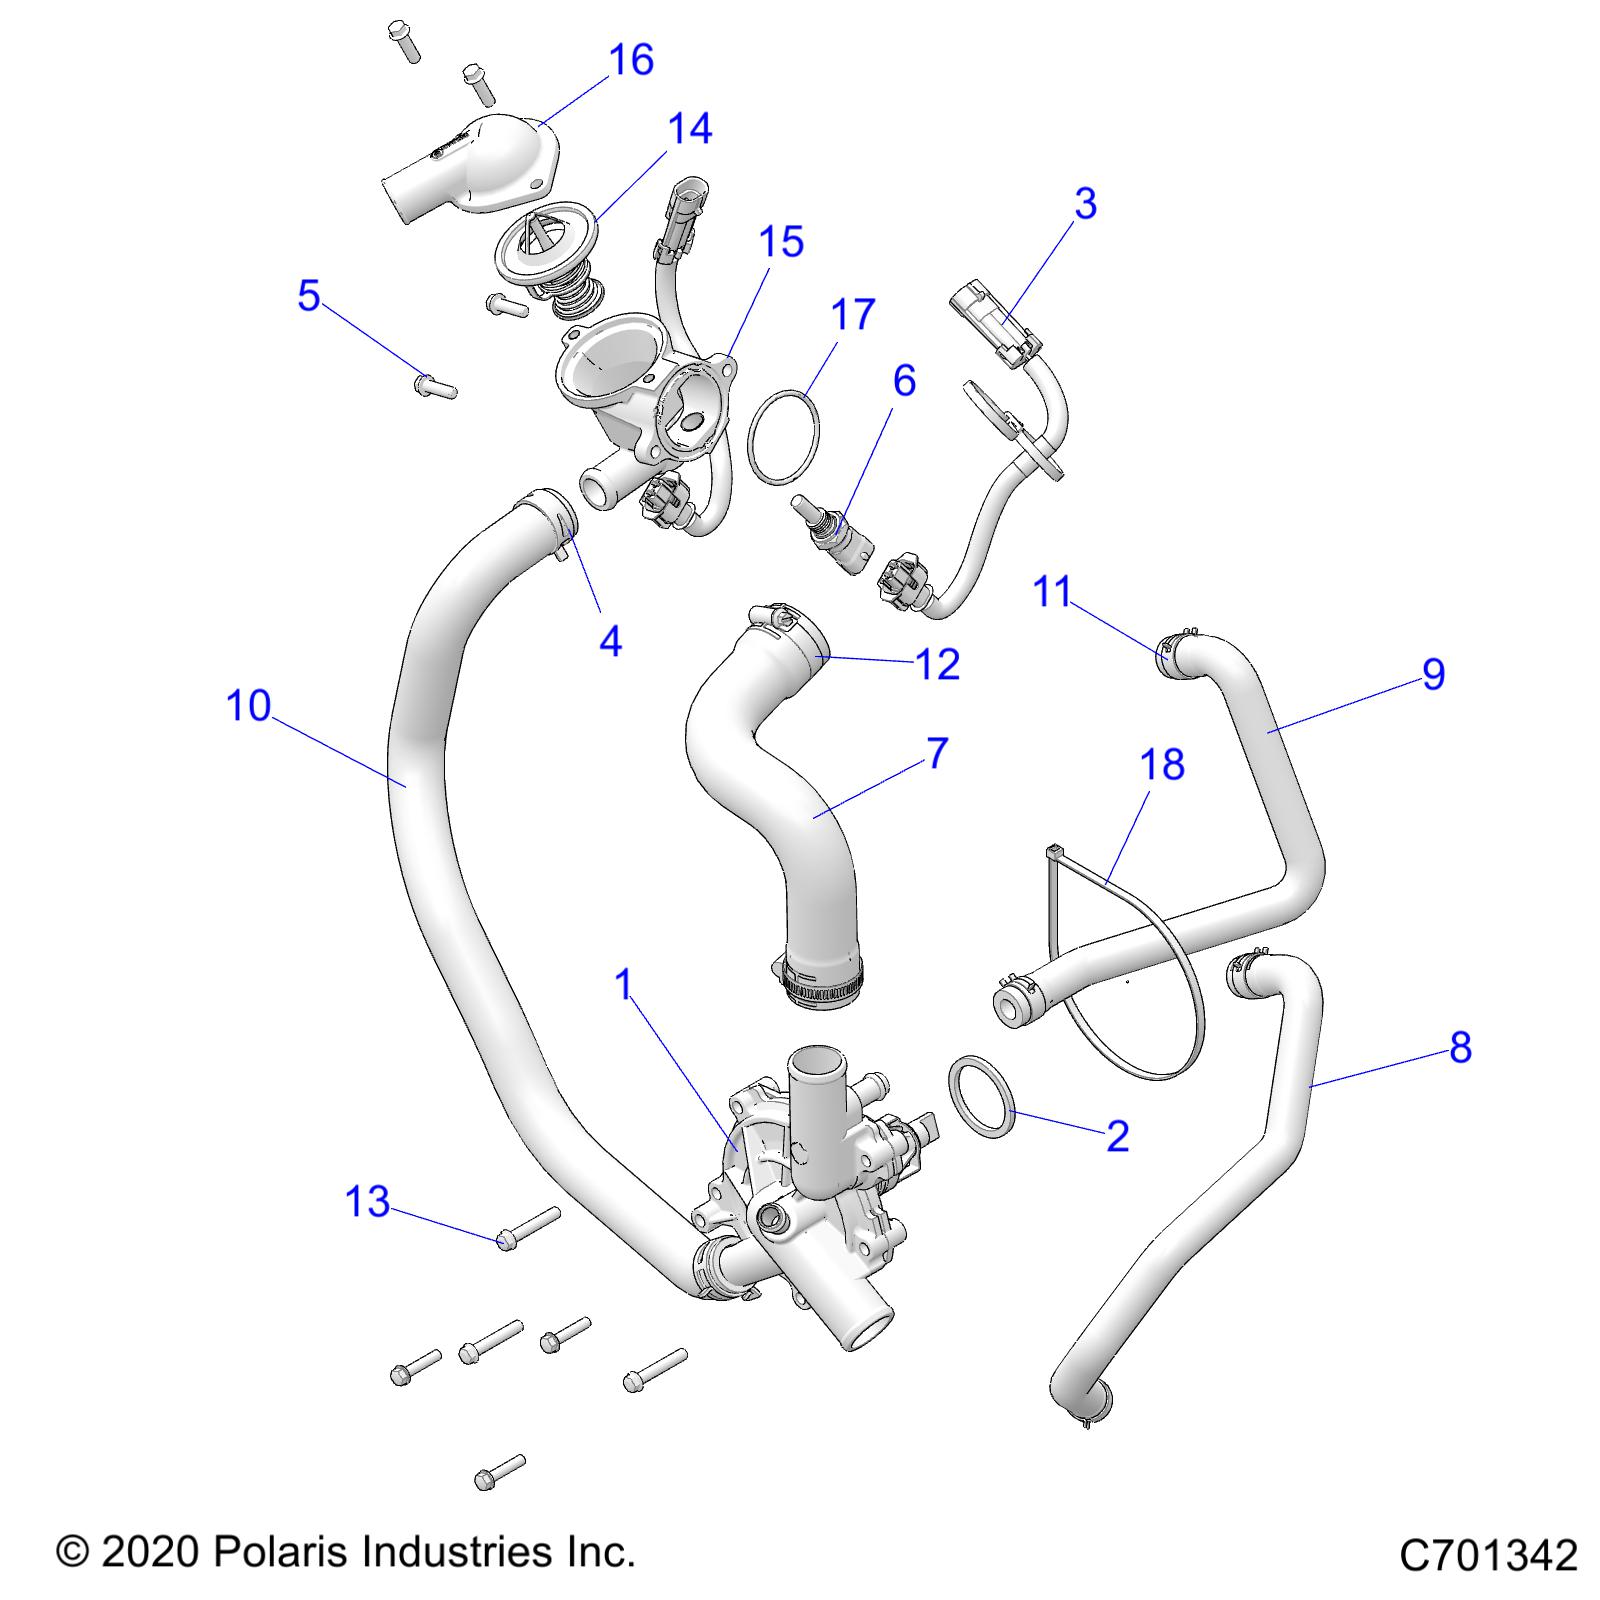 Part Number : 5416629 BYPASS HOSE